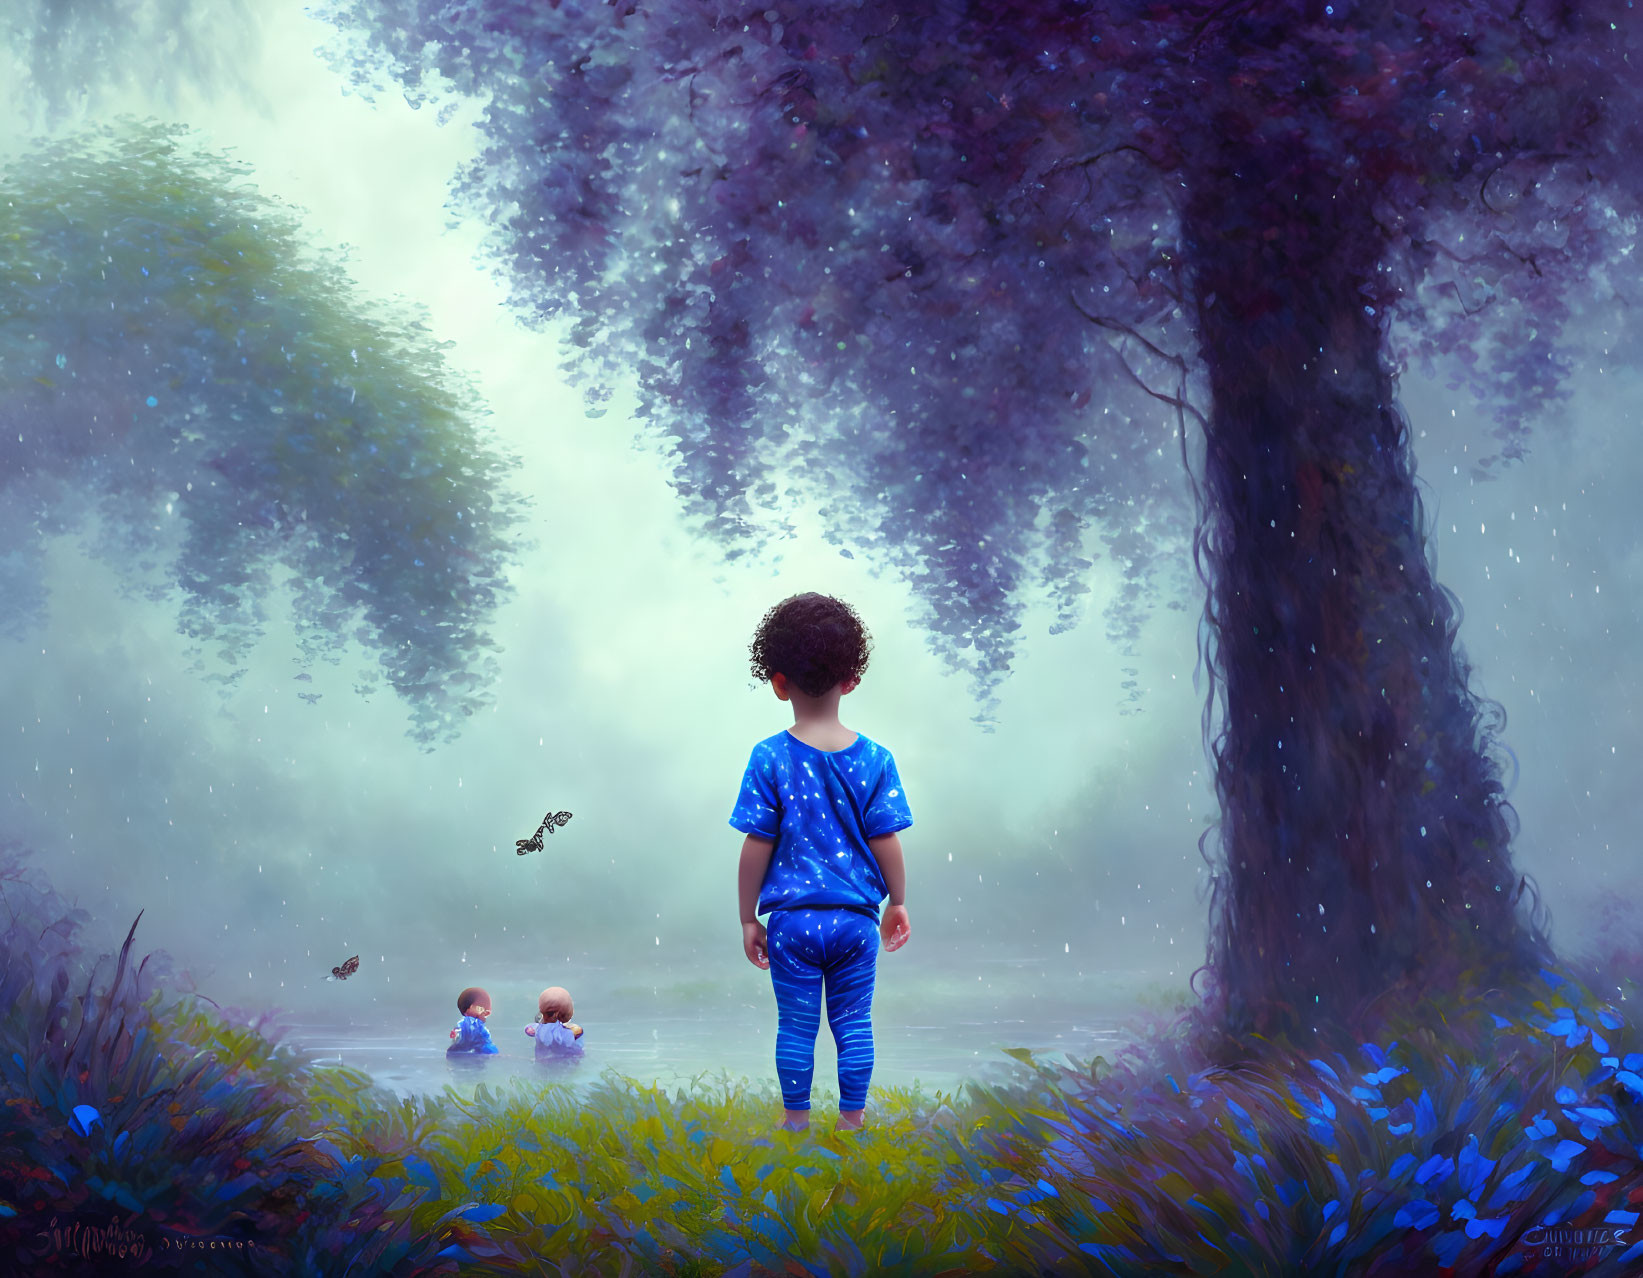 Child in blue surrounded by glowing flowers and ducks in mystical forest with butterflies.